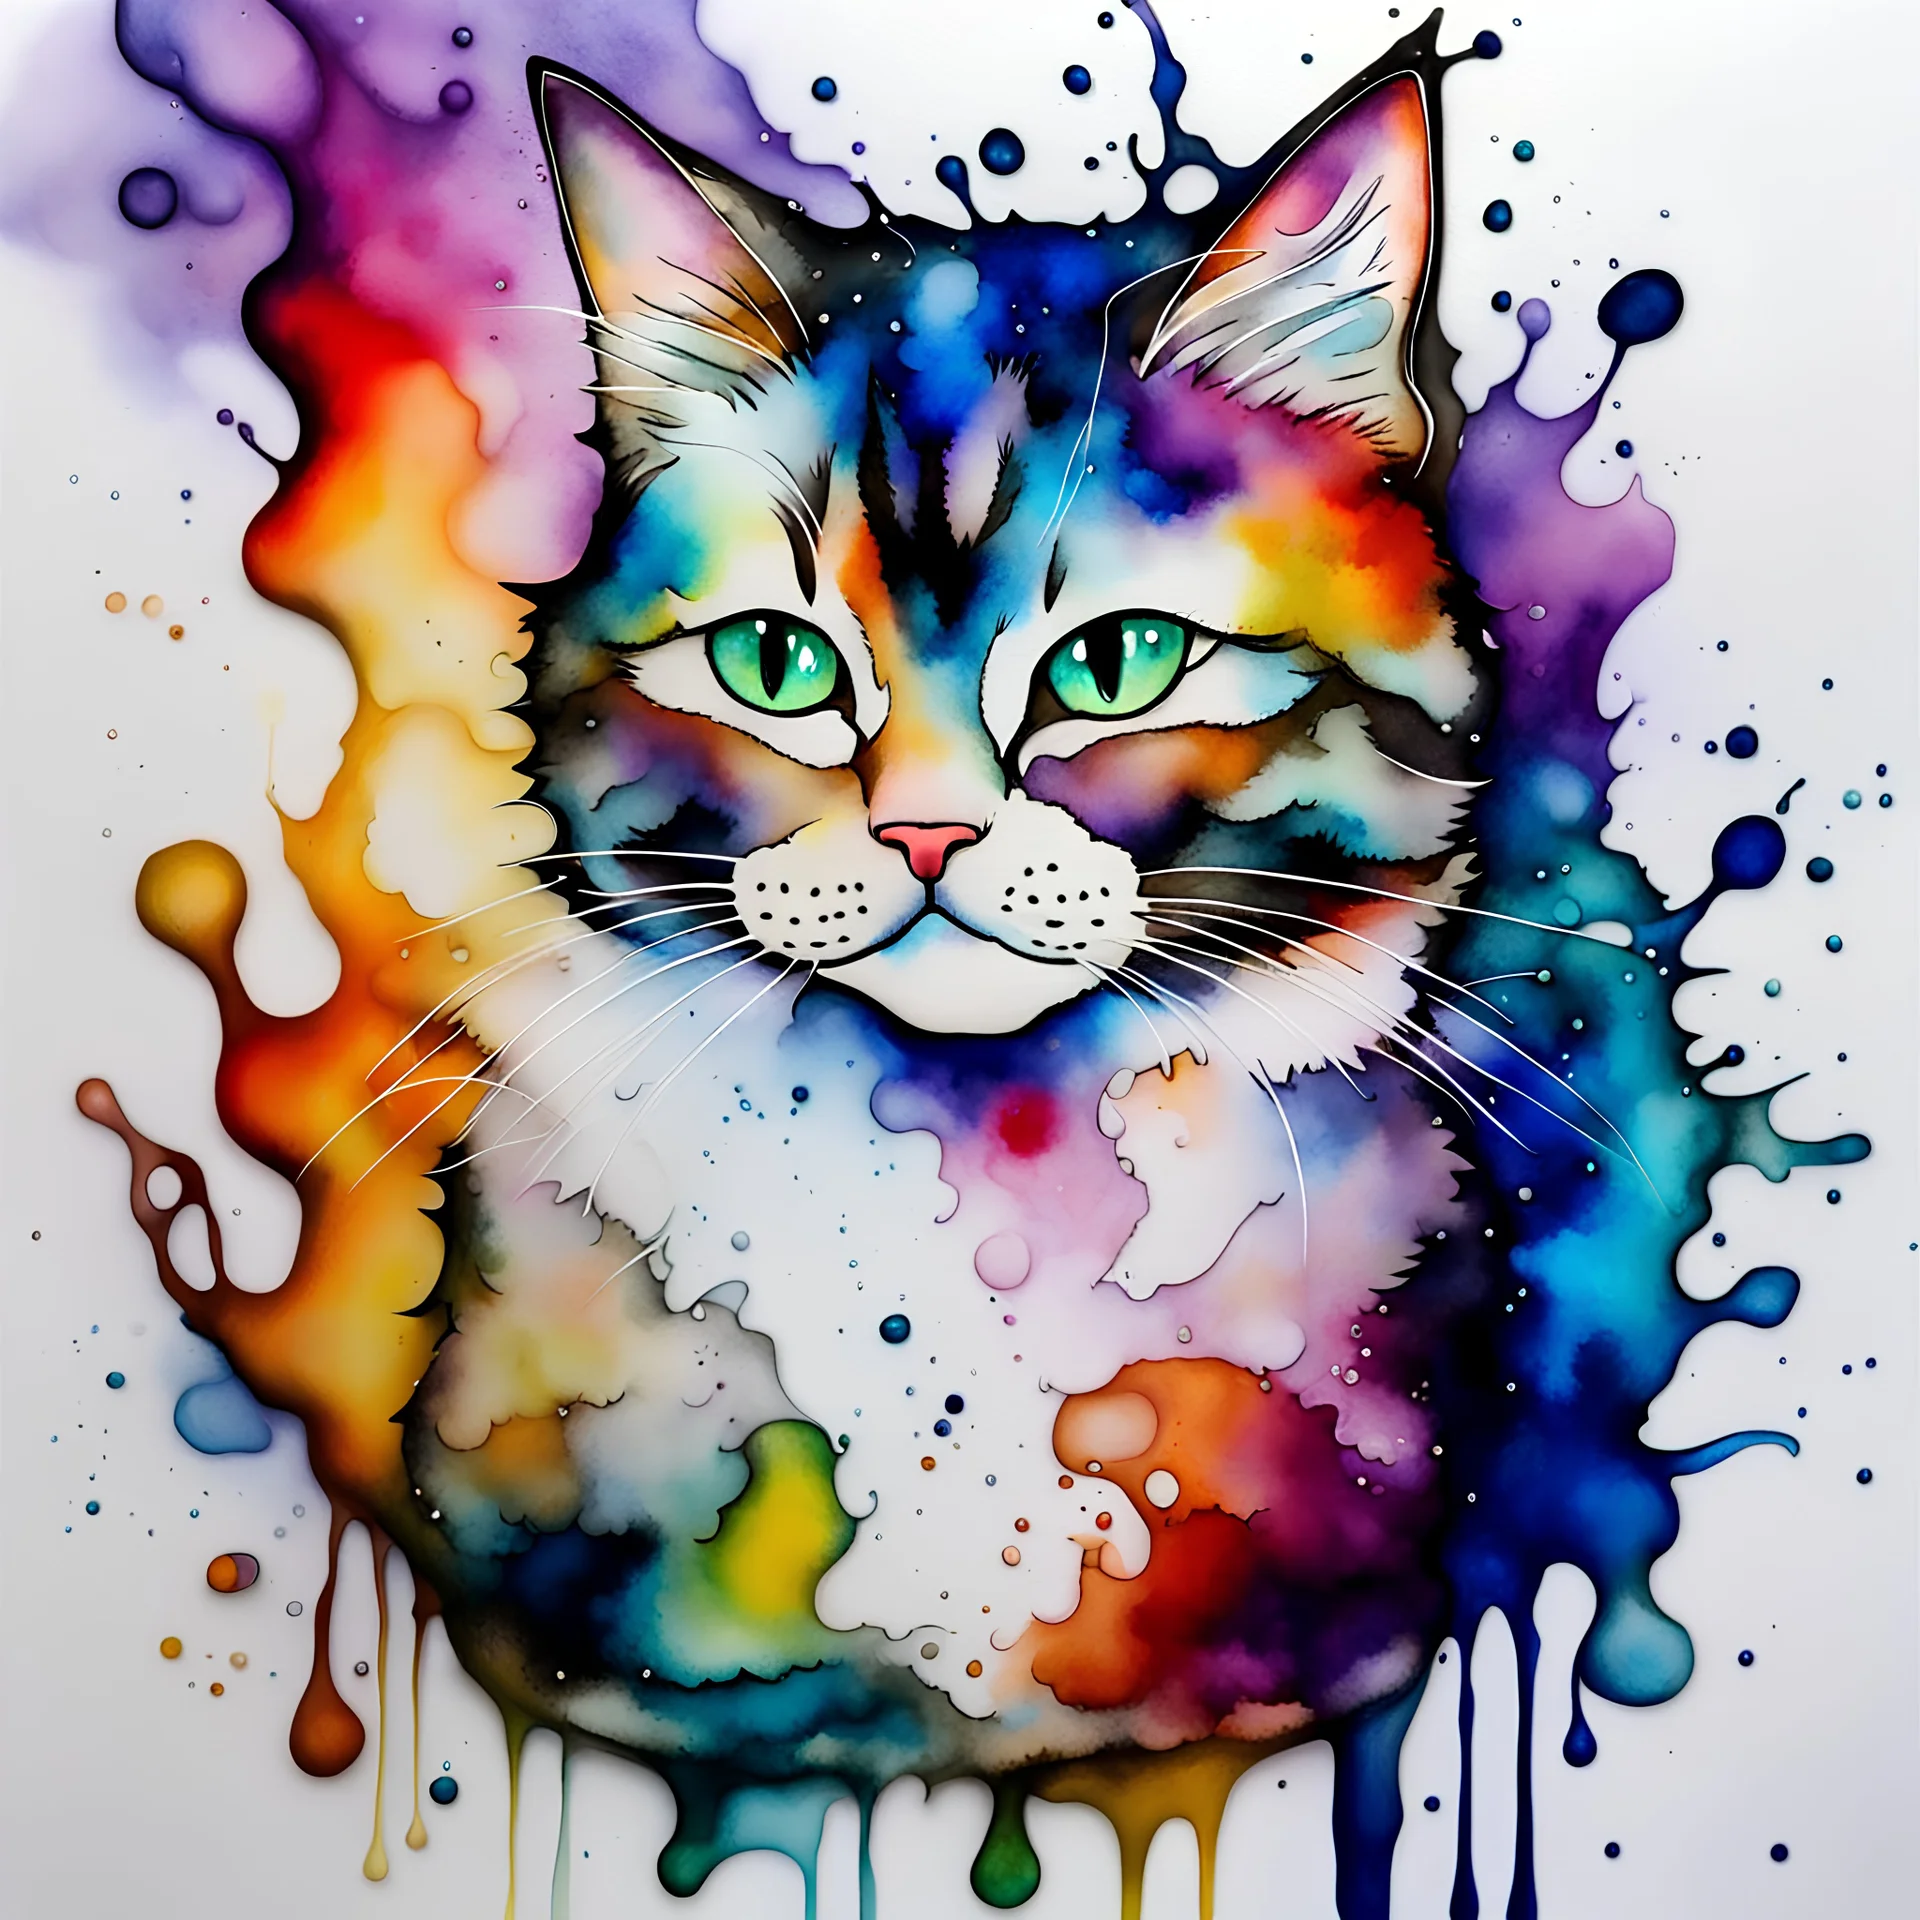 : Alcohol inks, inks on glass, splash art, watercolors. Essence of an [cats]. whimsical, unique.